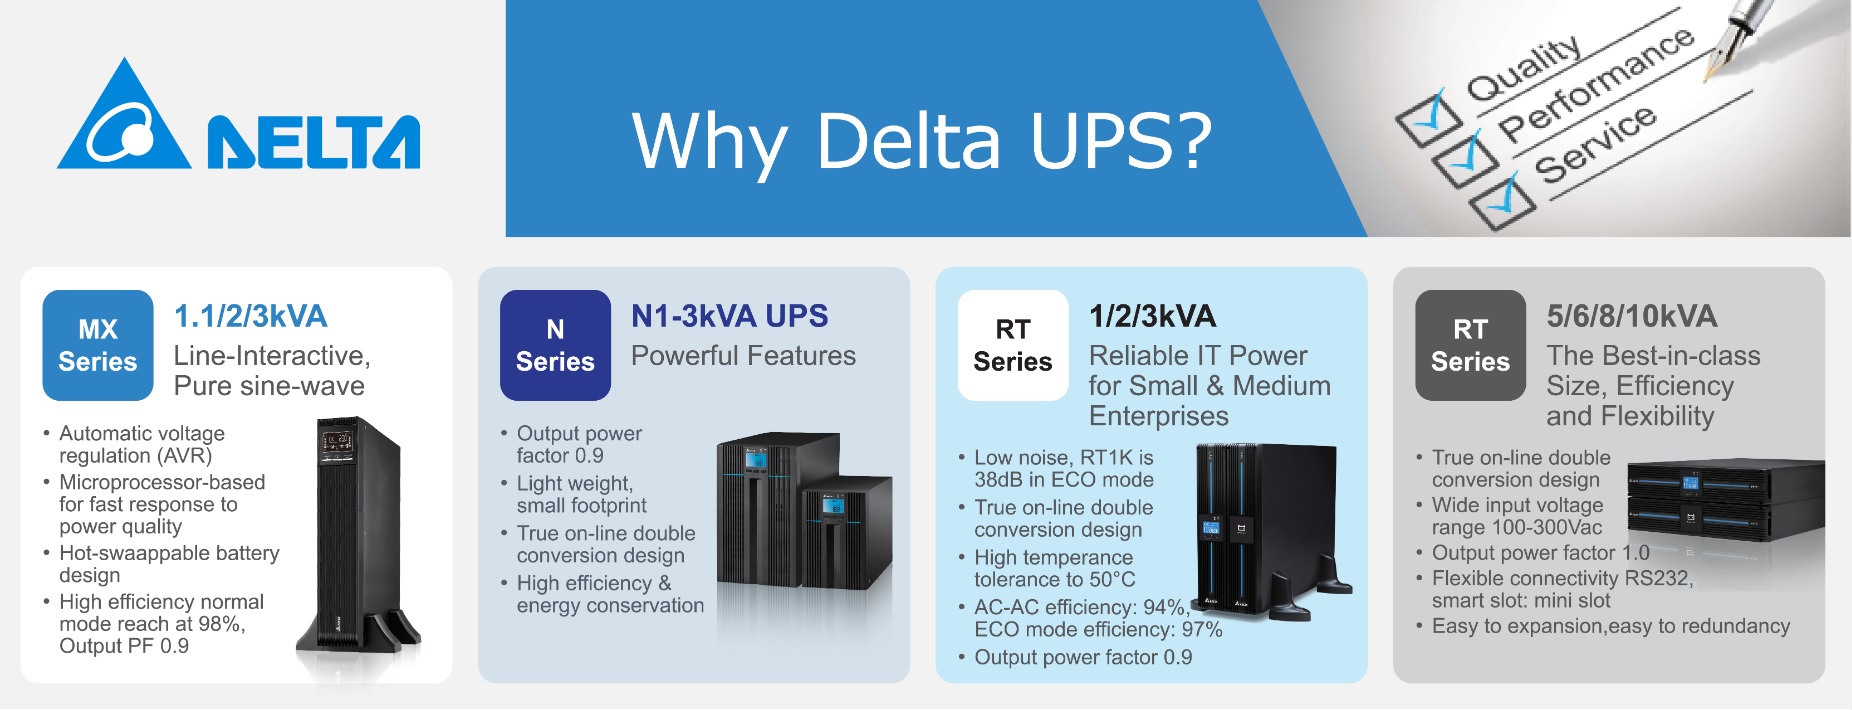 delta ups - quality , performance, service  -  all the best 